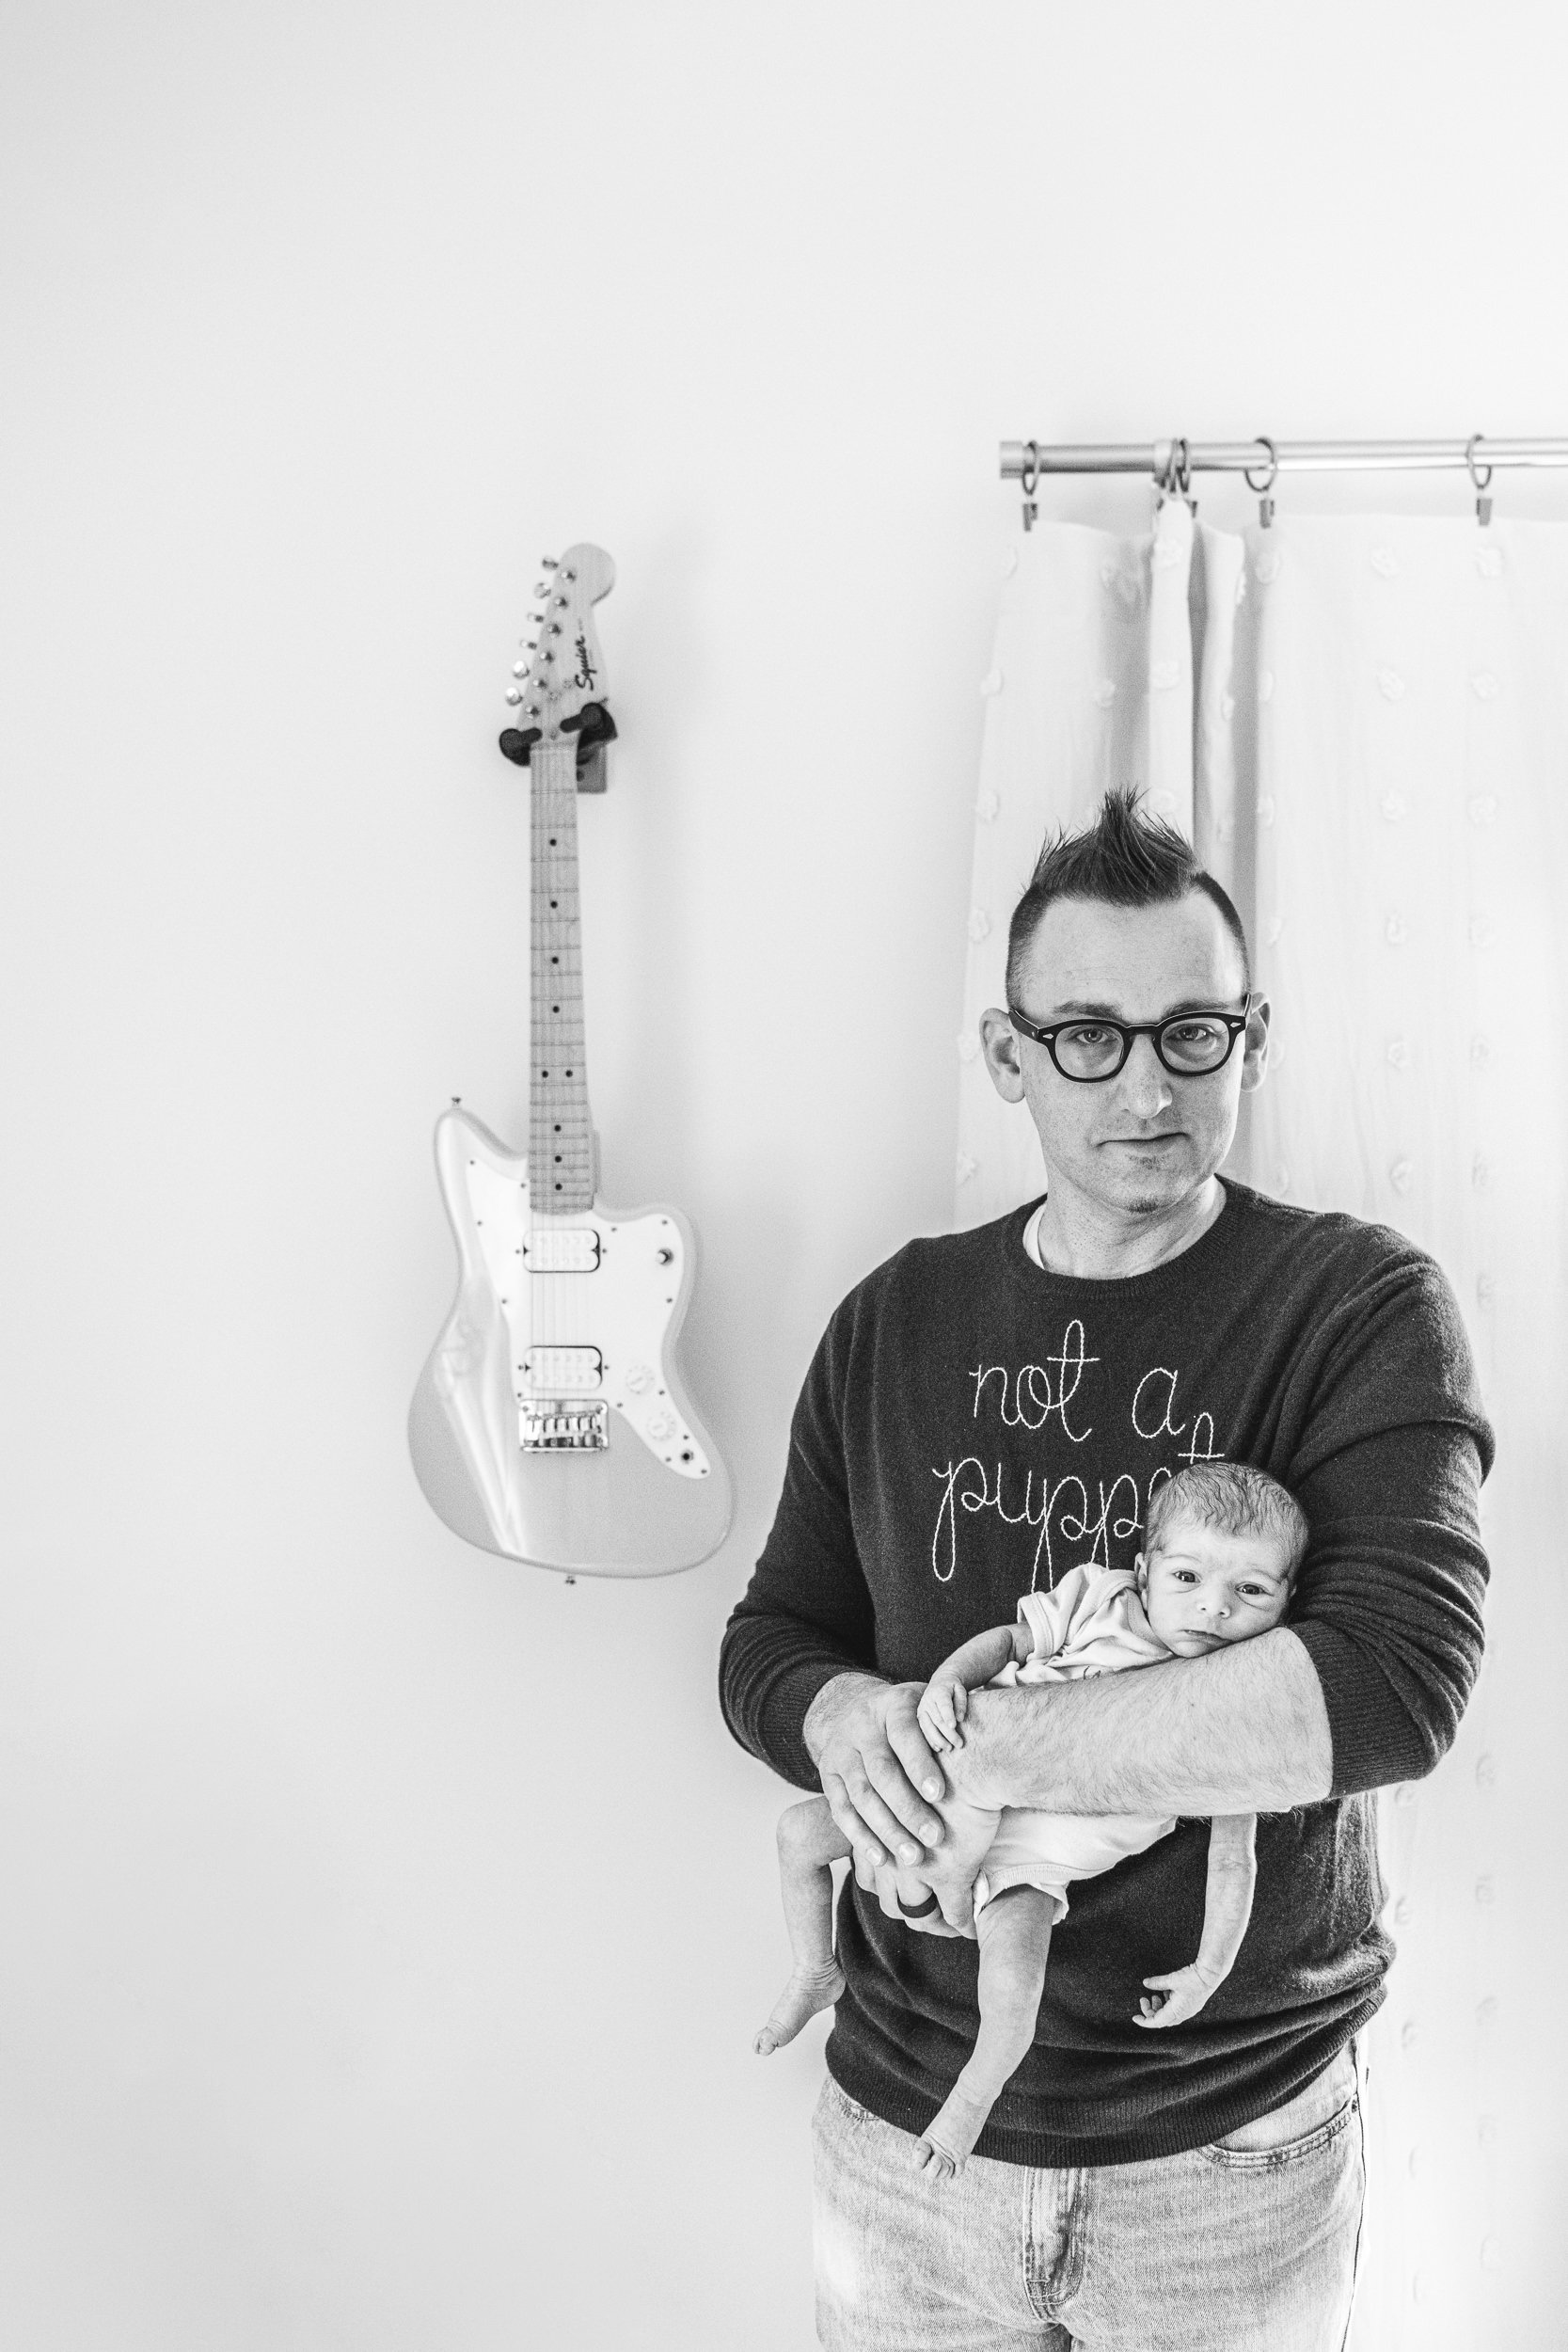  Dad holding his baby girl in front of a guitar on the wall in NJ by Nicole Hawkins Photography. guitar newborn #NicoleHawkinsPhotography #NicoleHawkinsFamily #Newborns #InHomeNewborns #NicoleHawkinsNewborns #NJnewborns #babygirl 